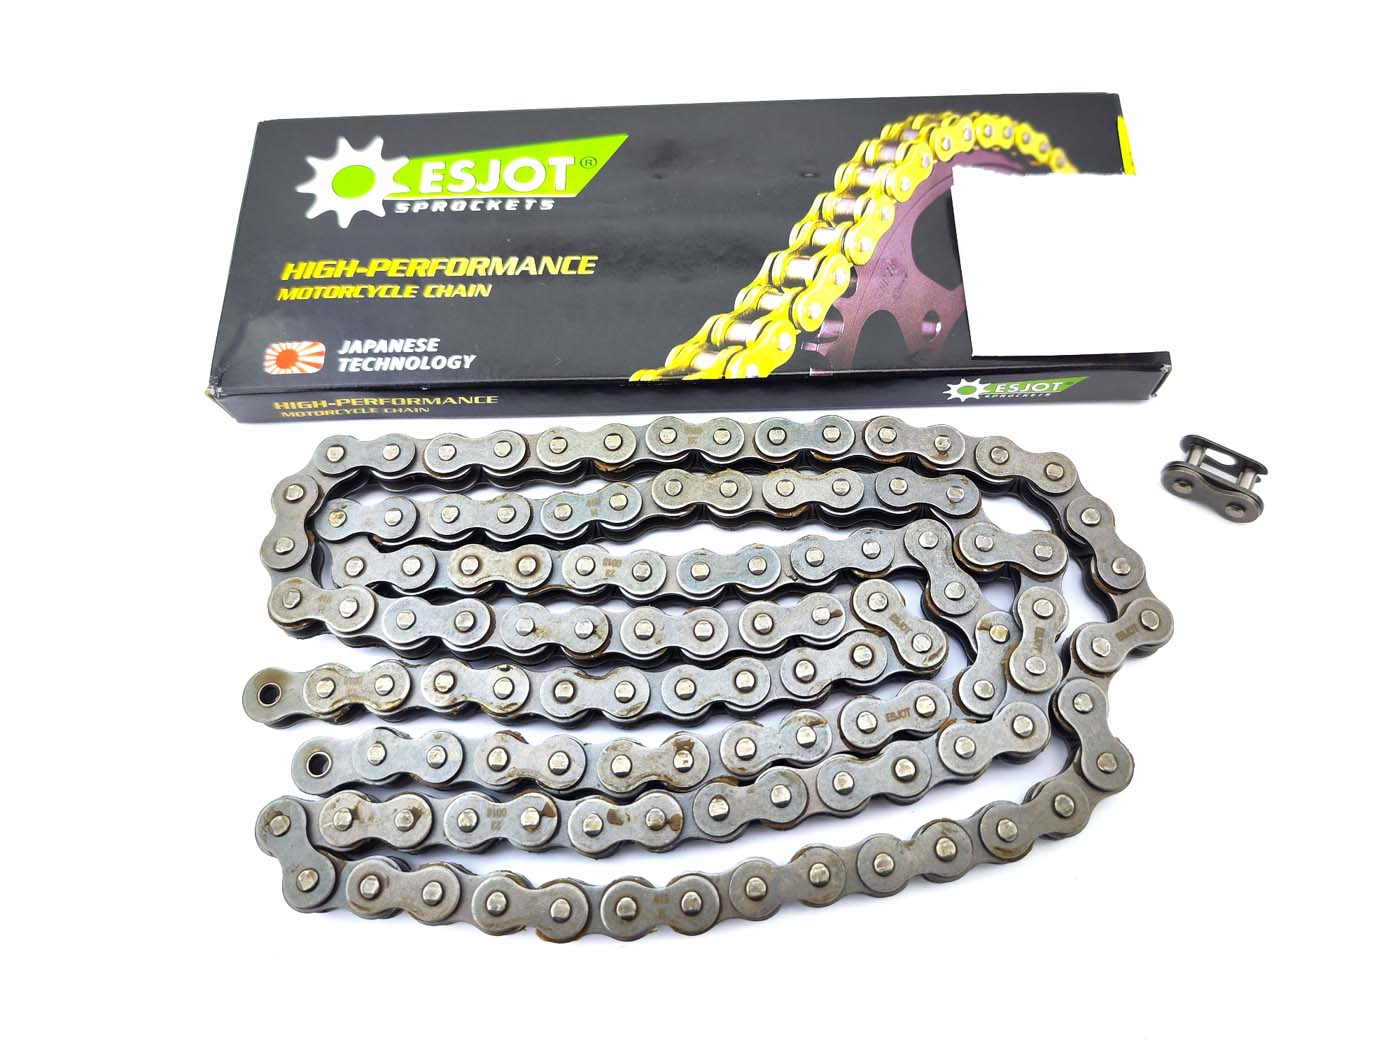 Chain Esjot Reinforced 82 Links For Mobylette Moby Dimoby Moped Moped Automatic